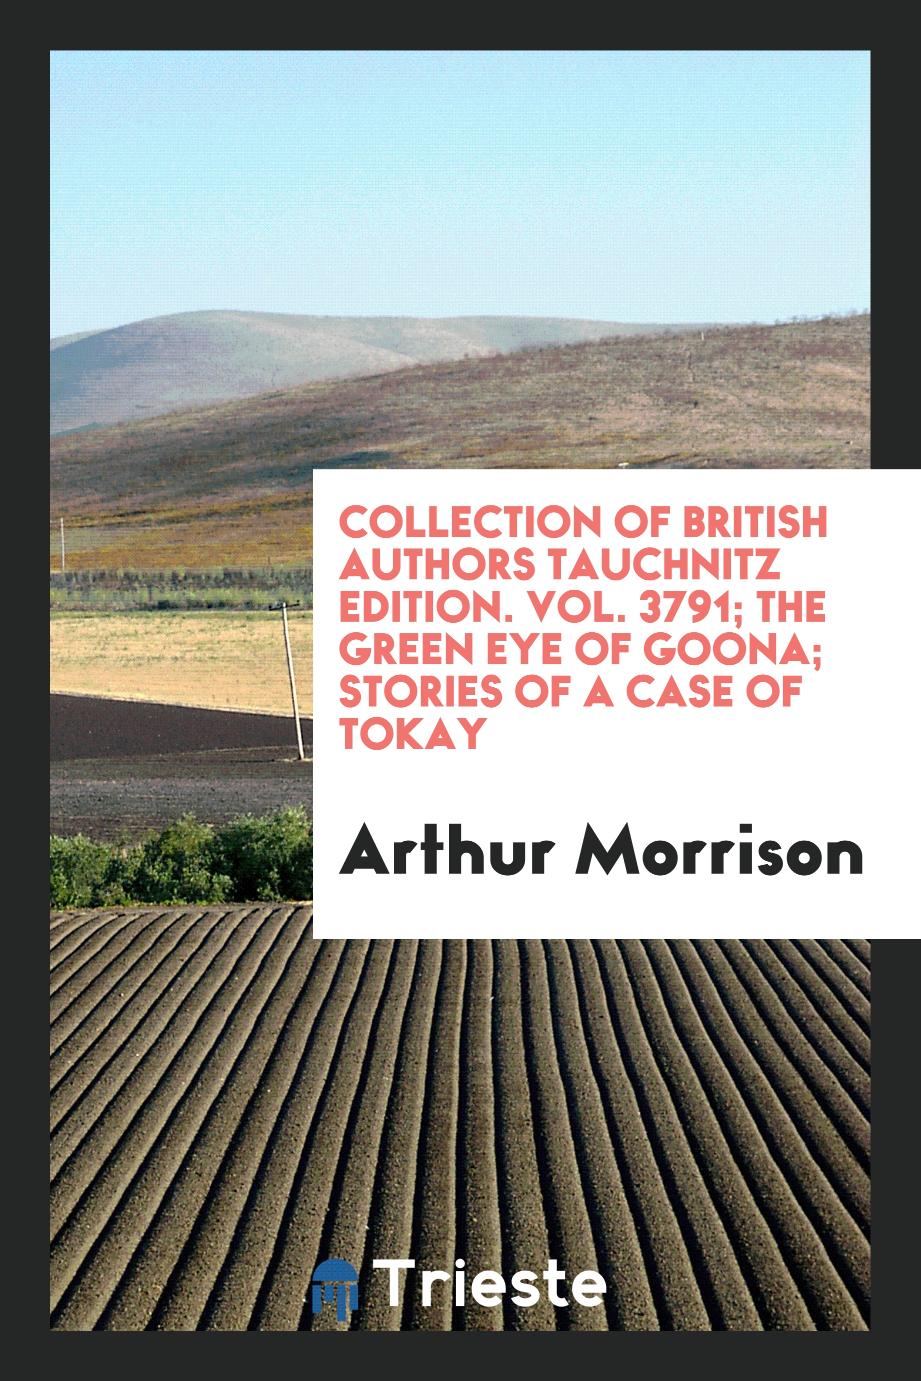 Collection of British Authors Tauchnitz Edition. Vol. 3791; The Green Eye of Goona; Stories of a Case of Tokay